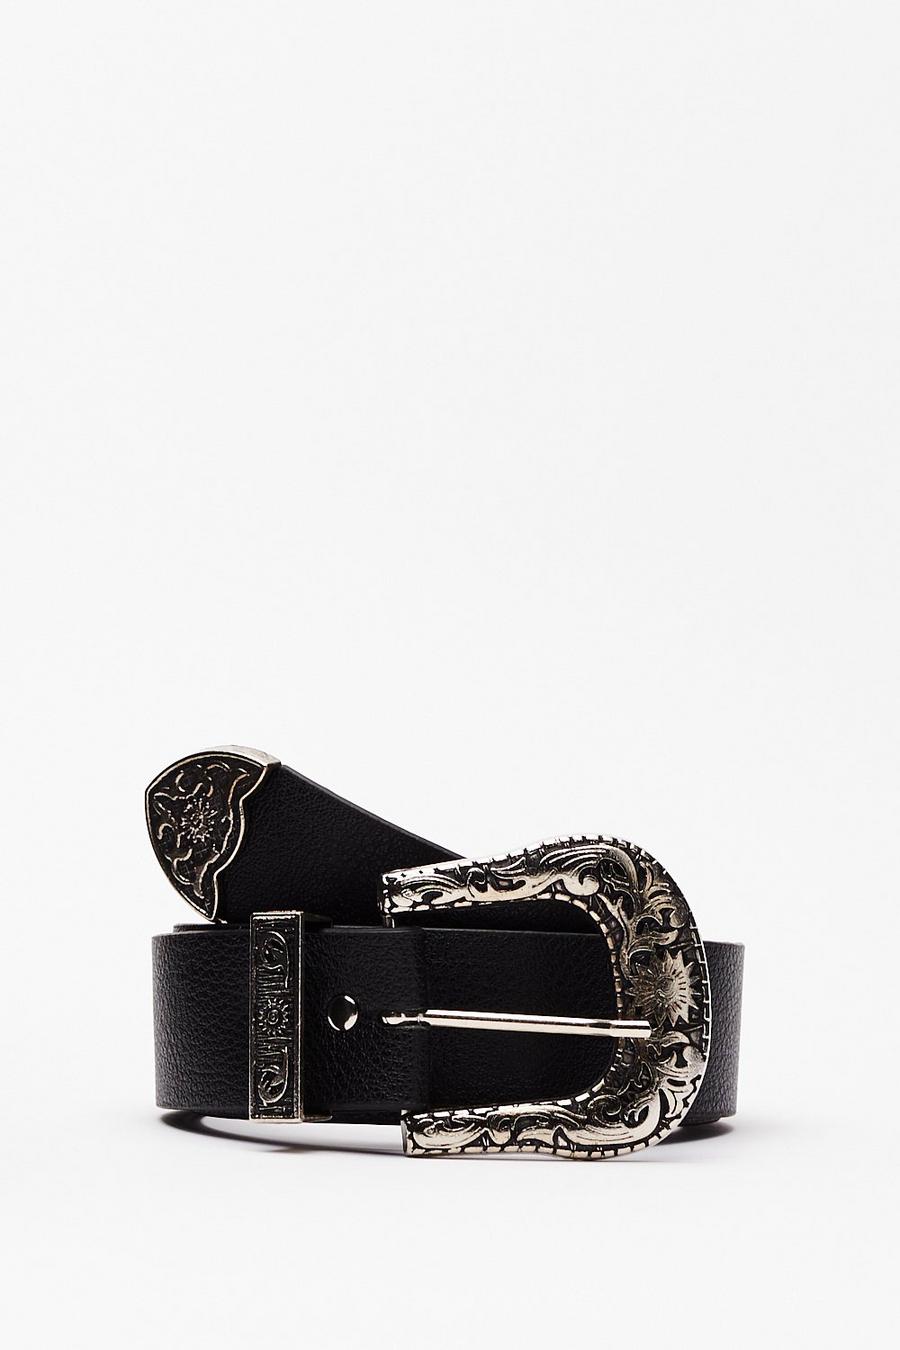 Never Second West Faux Leather Western Belt